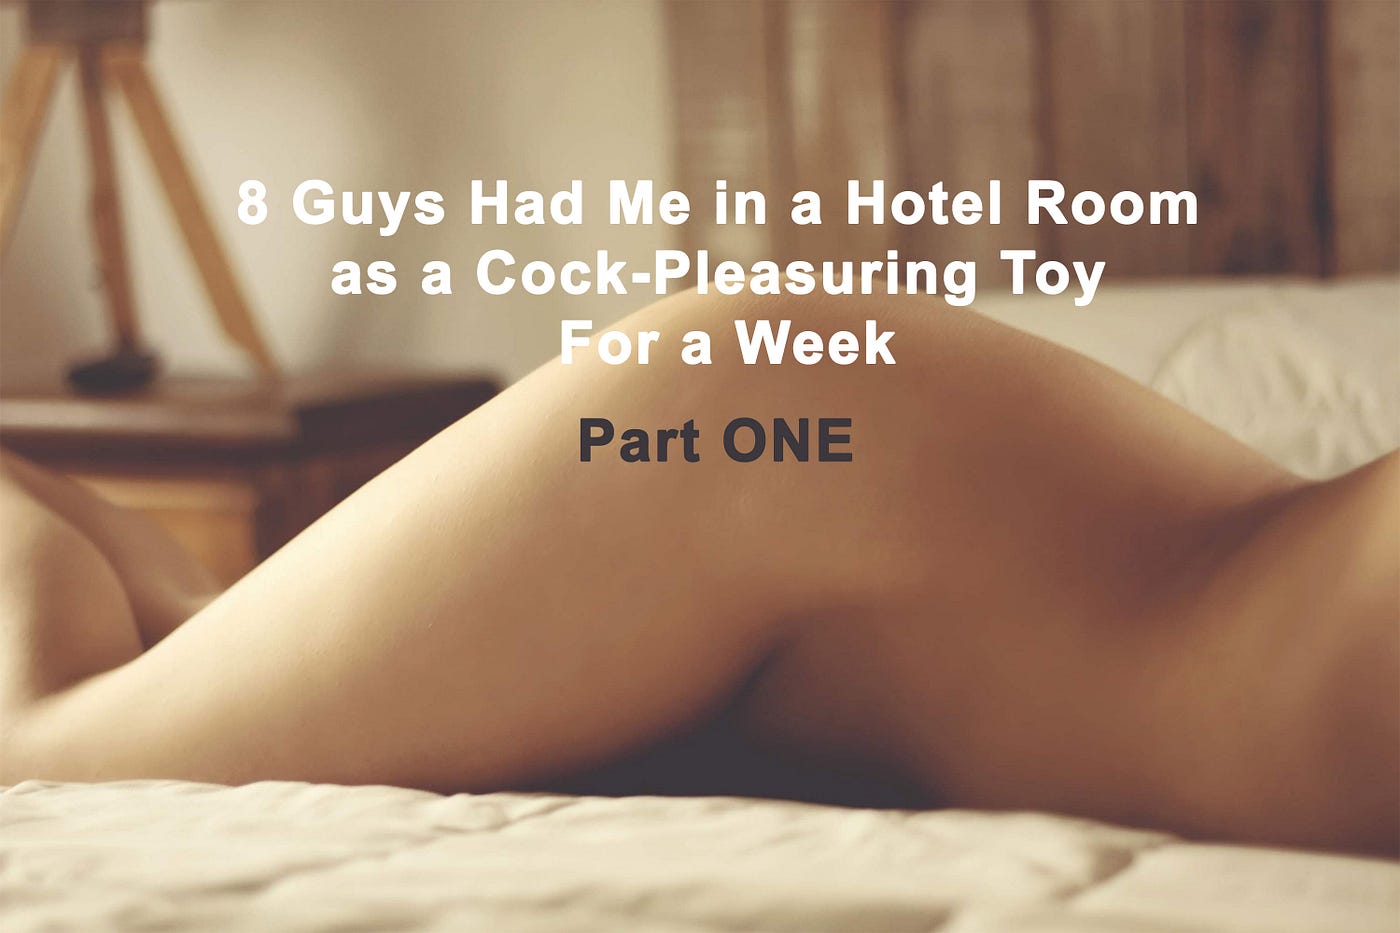 8 Guys Had Me In a Hotel Room as a Cock-Pleasuring Toy For a Week Part 1 by Delisha Keane Bare Skin Cafe Medium